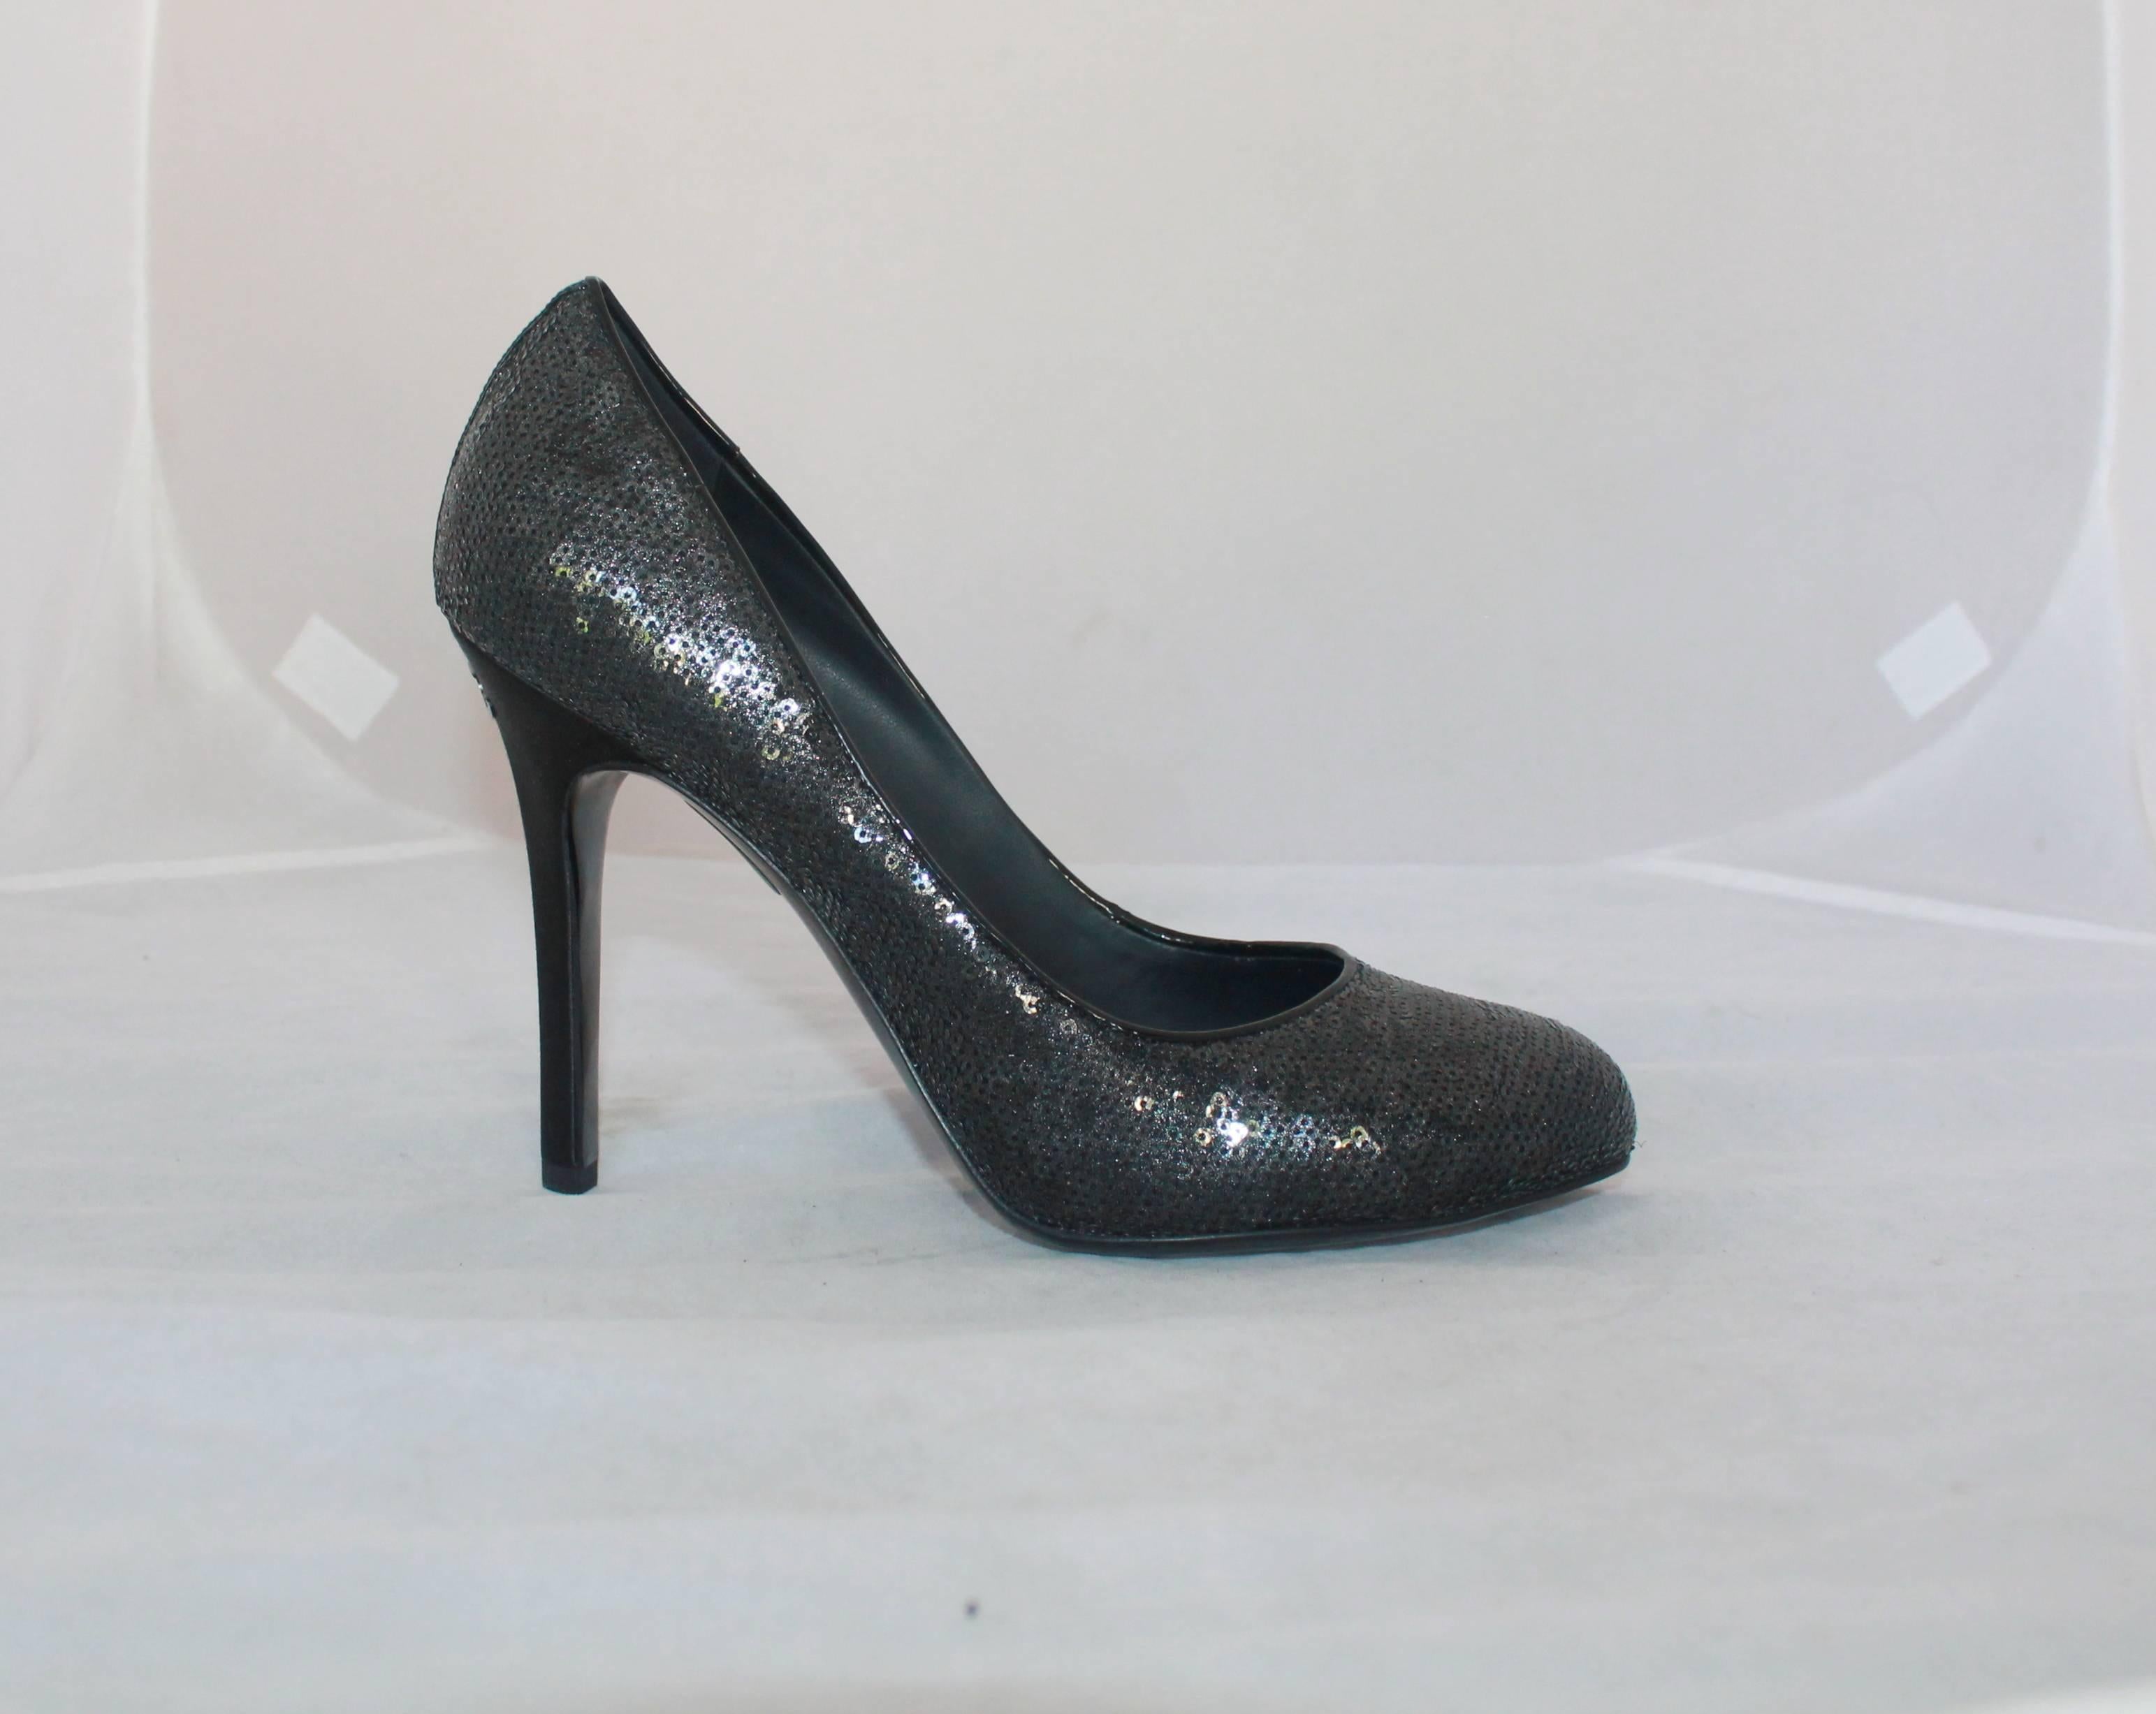 Chanel Black Sequin Pumps w/ Quilted Interior - Never Worn - 40.  These exquisite pumps are absolutely beautiful with the entire exterior covered in black sequins.  They have a silver "CC" on the heel.  They are in perfect condition as